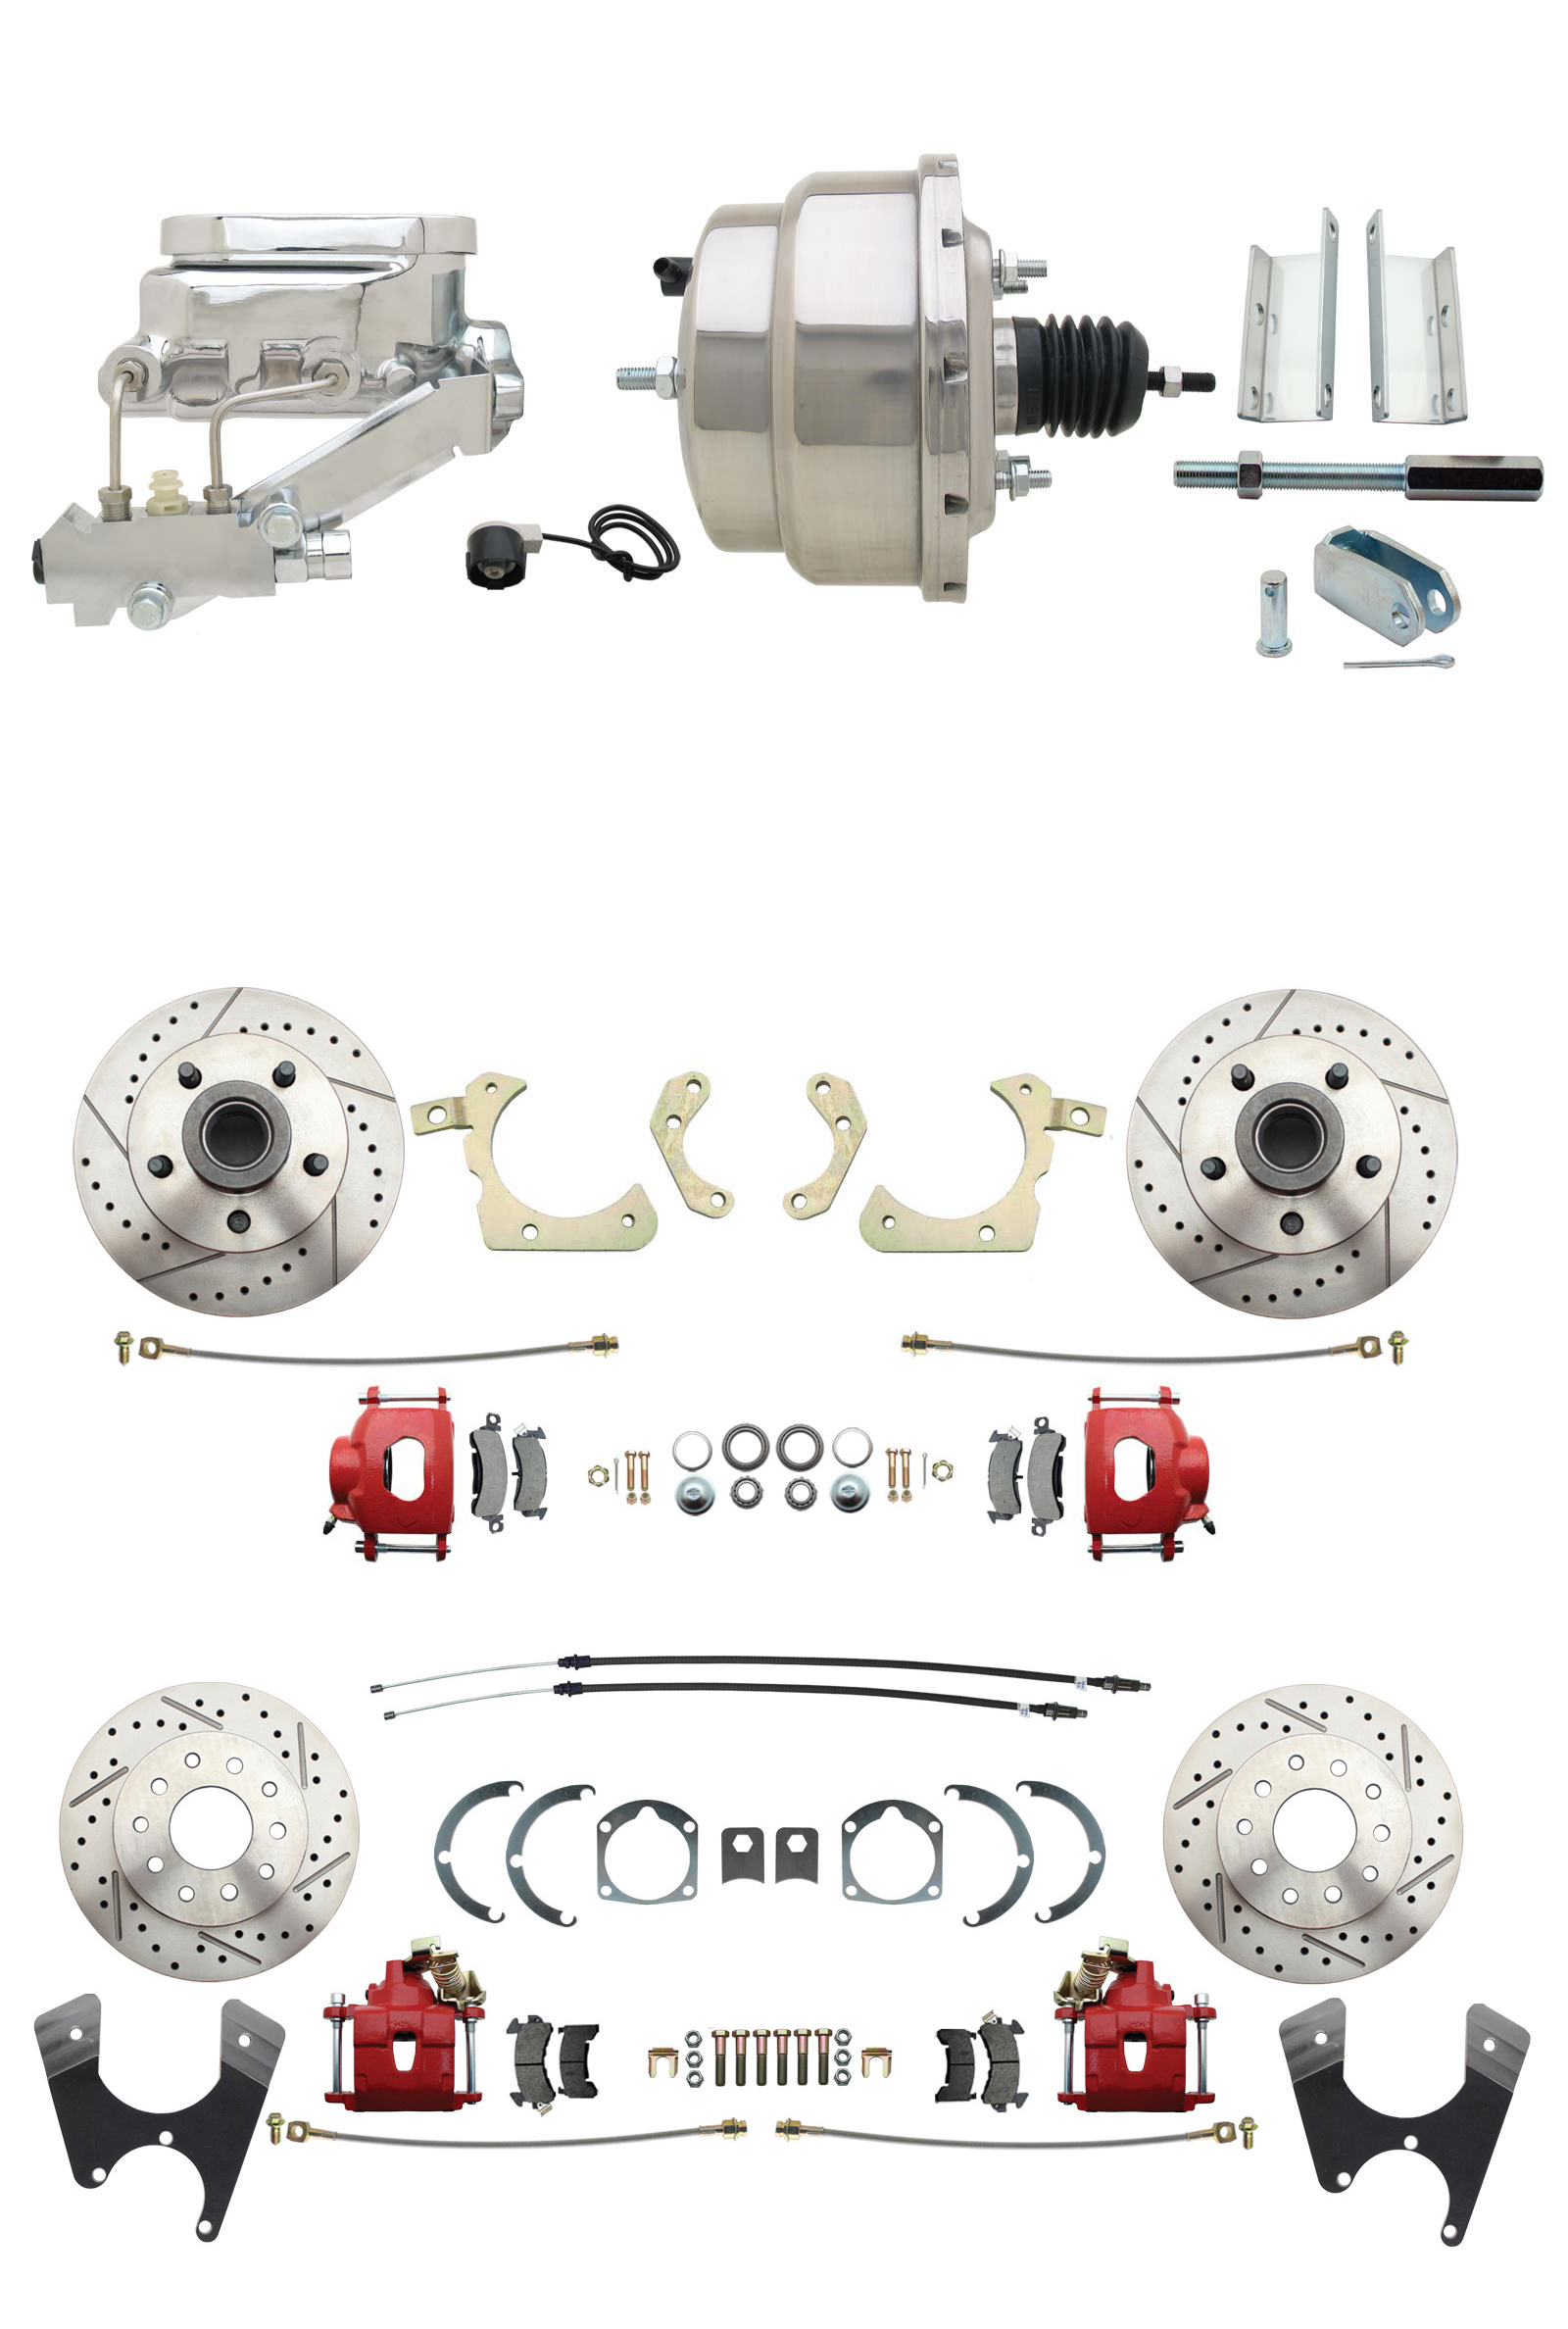 1955-1958 GM Full Size Front & Rear Power Disc Brake Kit Red Powder Coated Calipers Drilled/Slotted Rotors (Impala, Bel Air, Biscayne) & 8 Dual Stainless Steel Booster Conversion Kit W/ Chrome Flat Top Master Cylinder L